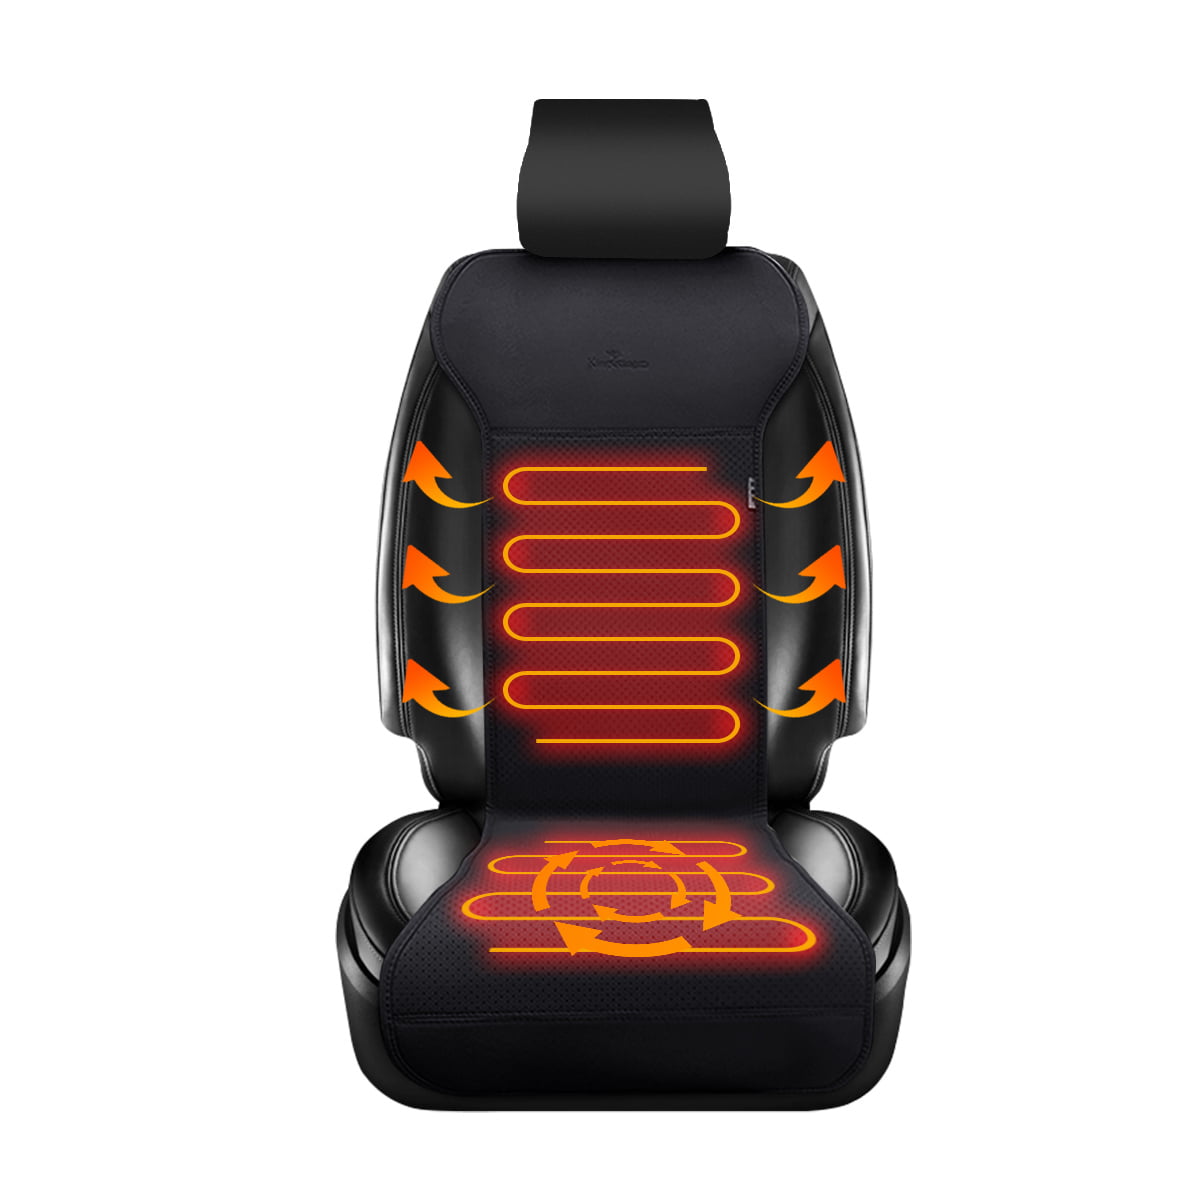 Black KINGLETING Warmer Seat Cushion with Intelligent Temperature Controller. 